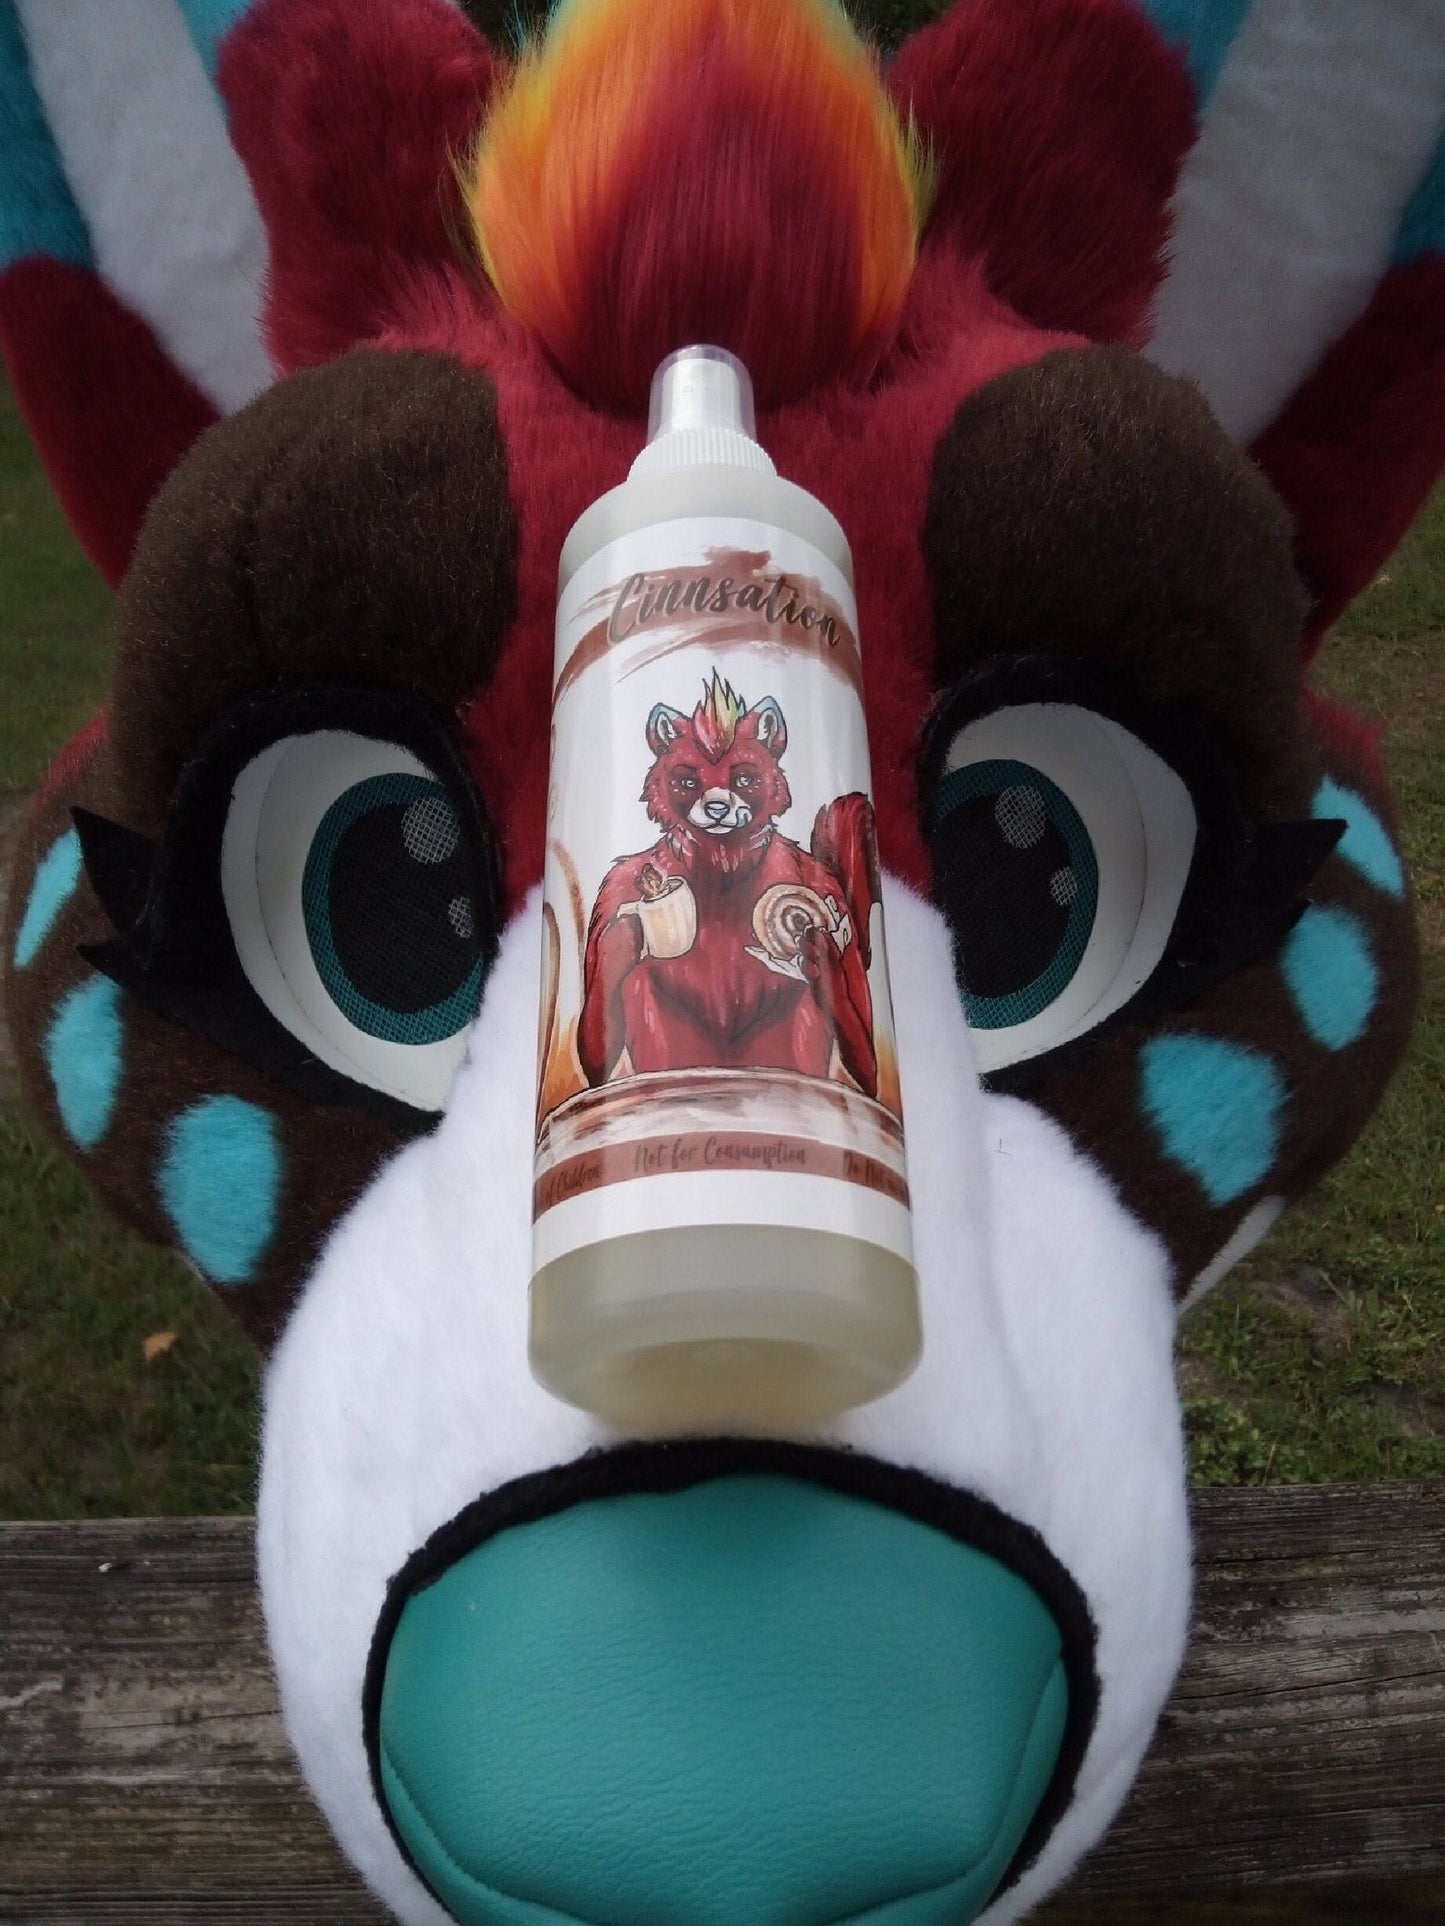 Fursuit Spray Cinnamon Cinnsation Bottle Fragrance and Cleaner 8oz Essential Cleaning Costume Cleaner US Buyers Only